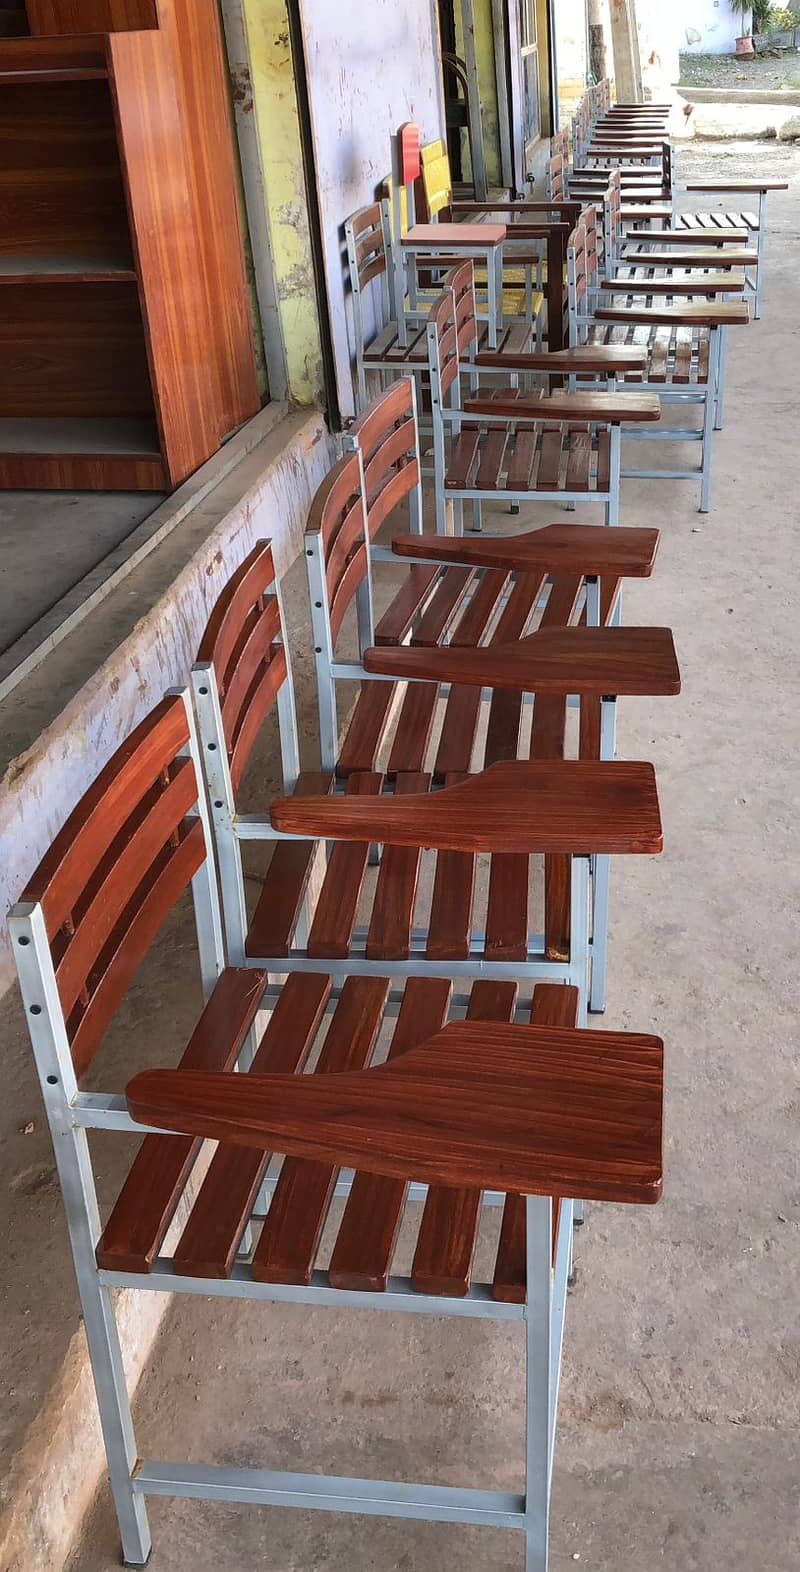 school chairs / chairs / college chairs / desk / bench / office table 7